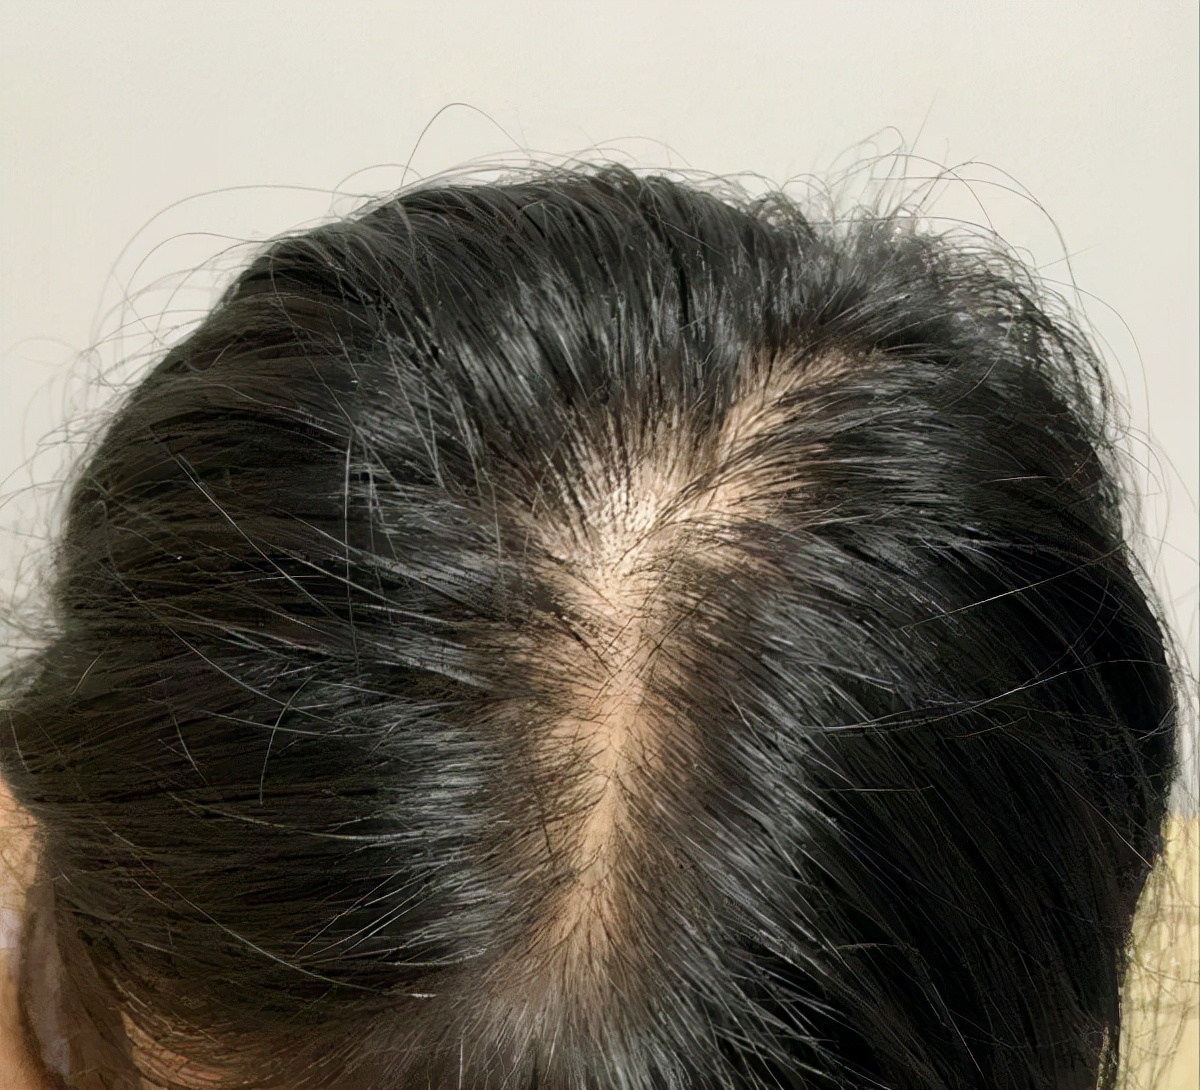 Is hair gap width considered hair loss?Can it be restored? - iMedia